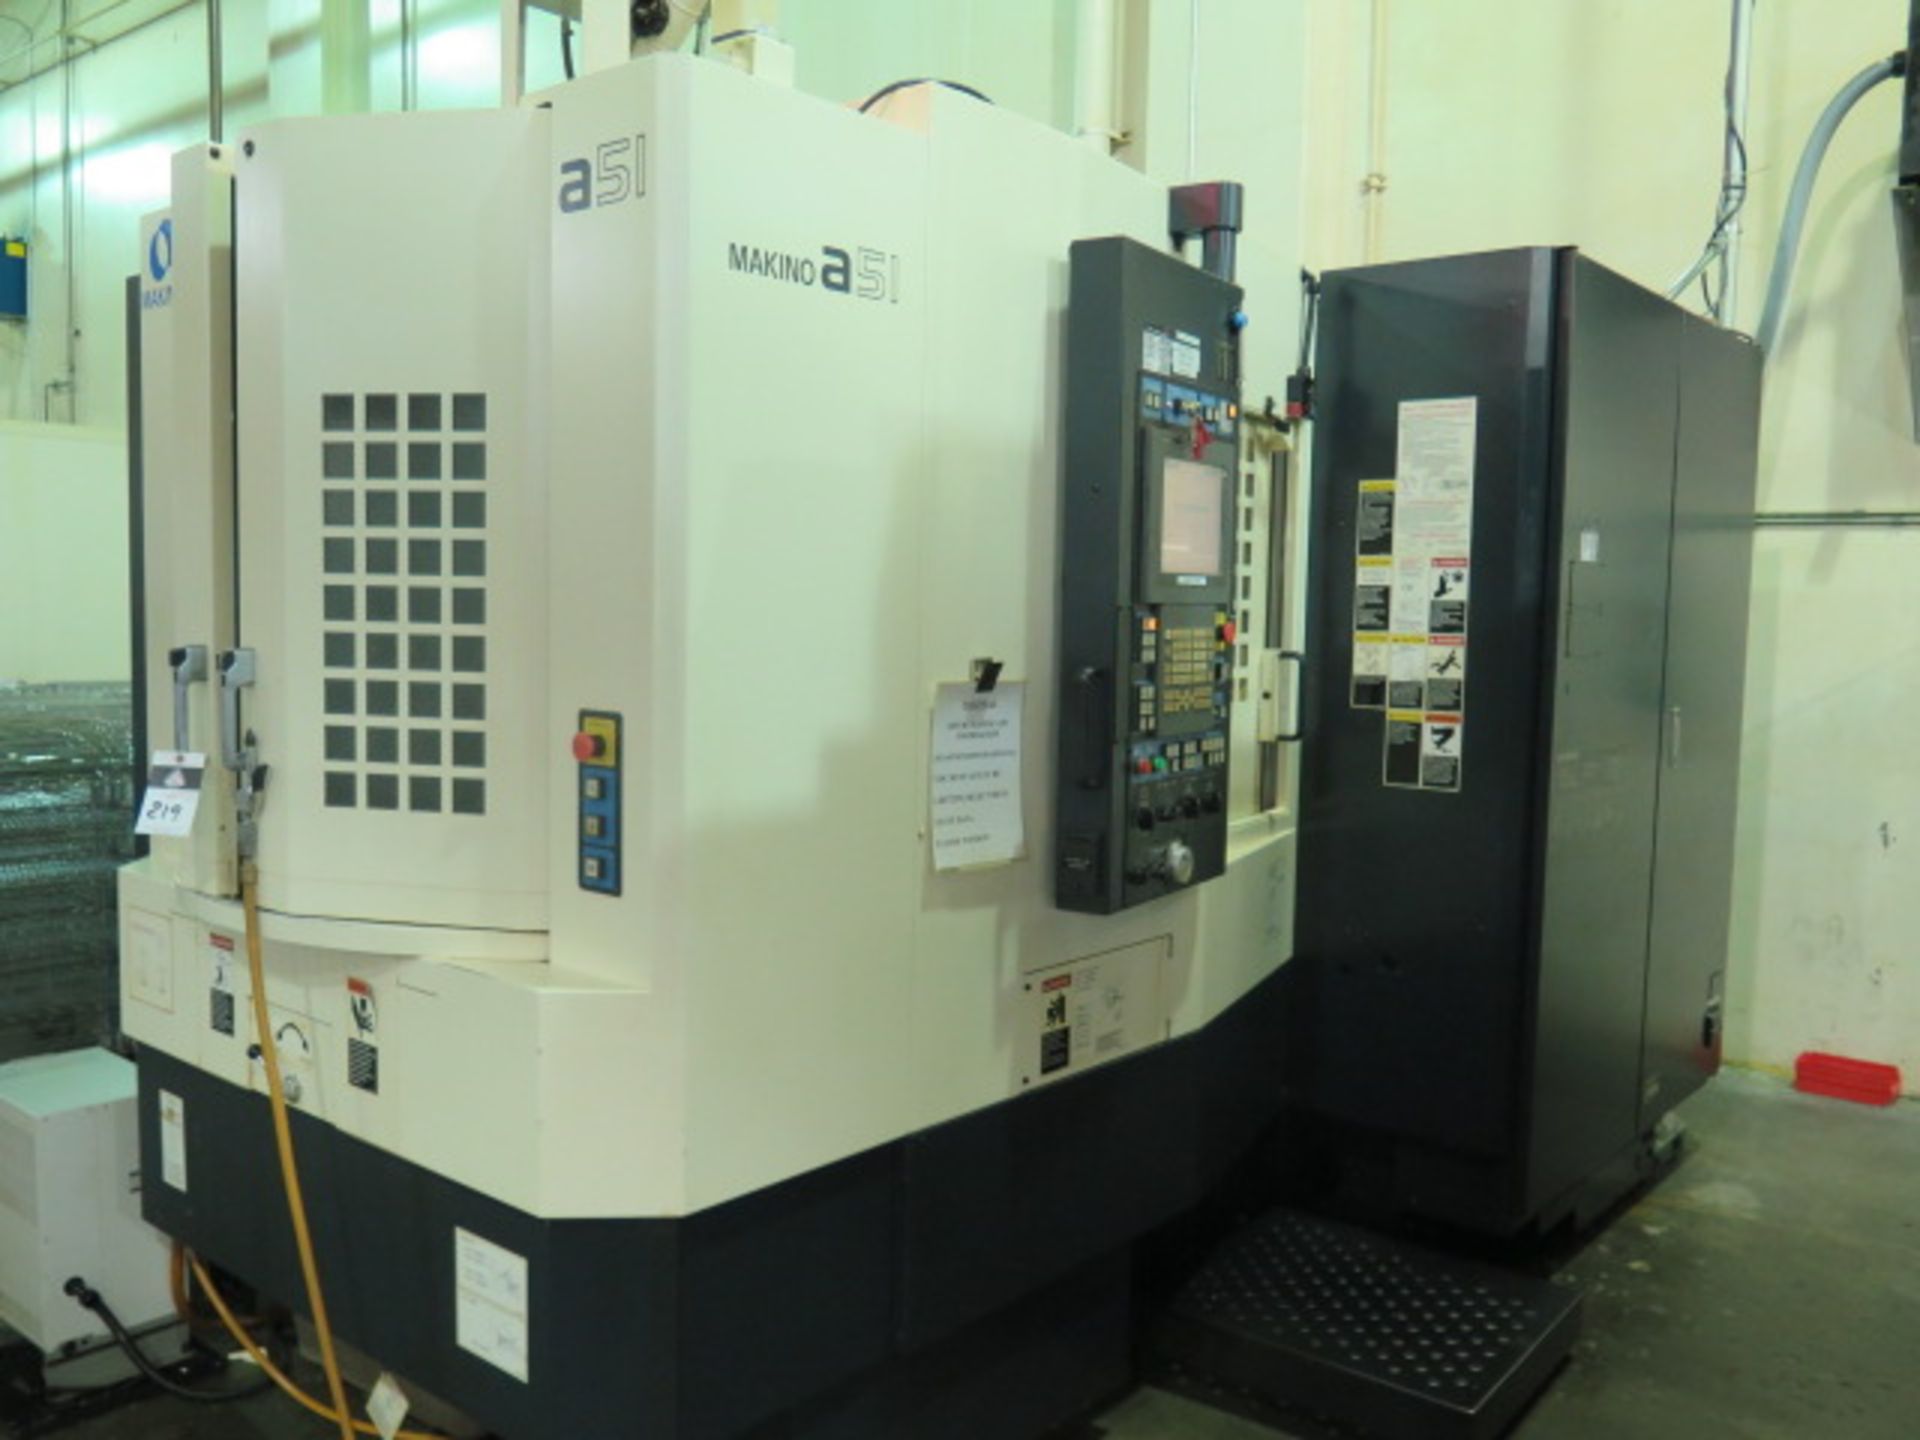 Makino a51 2-Pallet 4-Axis CNC HMC s/n 1617 w/ Makino “Professional 5 Control, SOLD AS IS